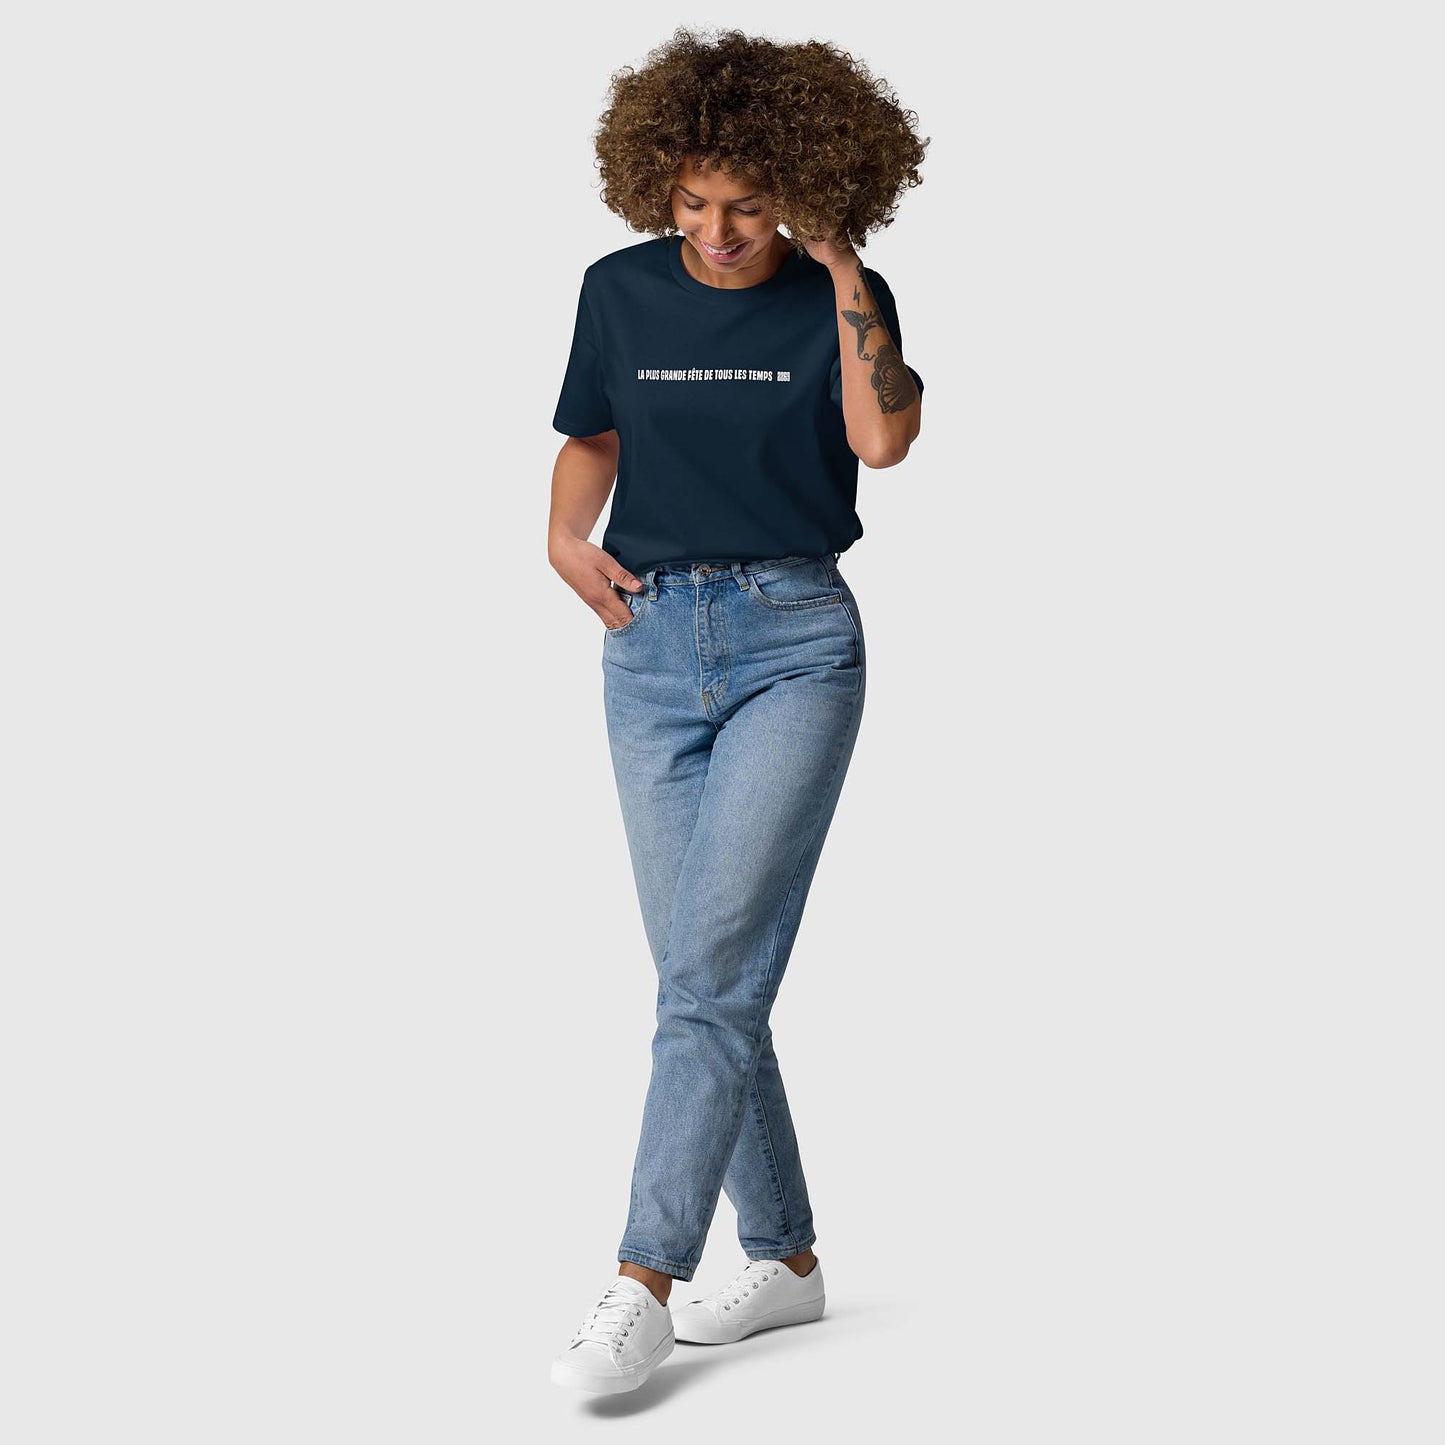 Unisex navy organic cotton t-shirt with French 2269 party line